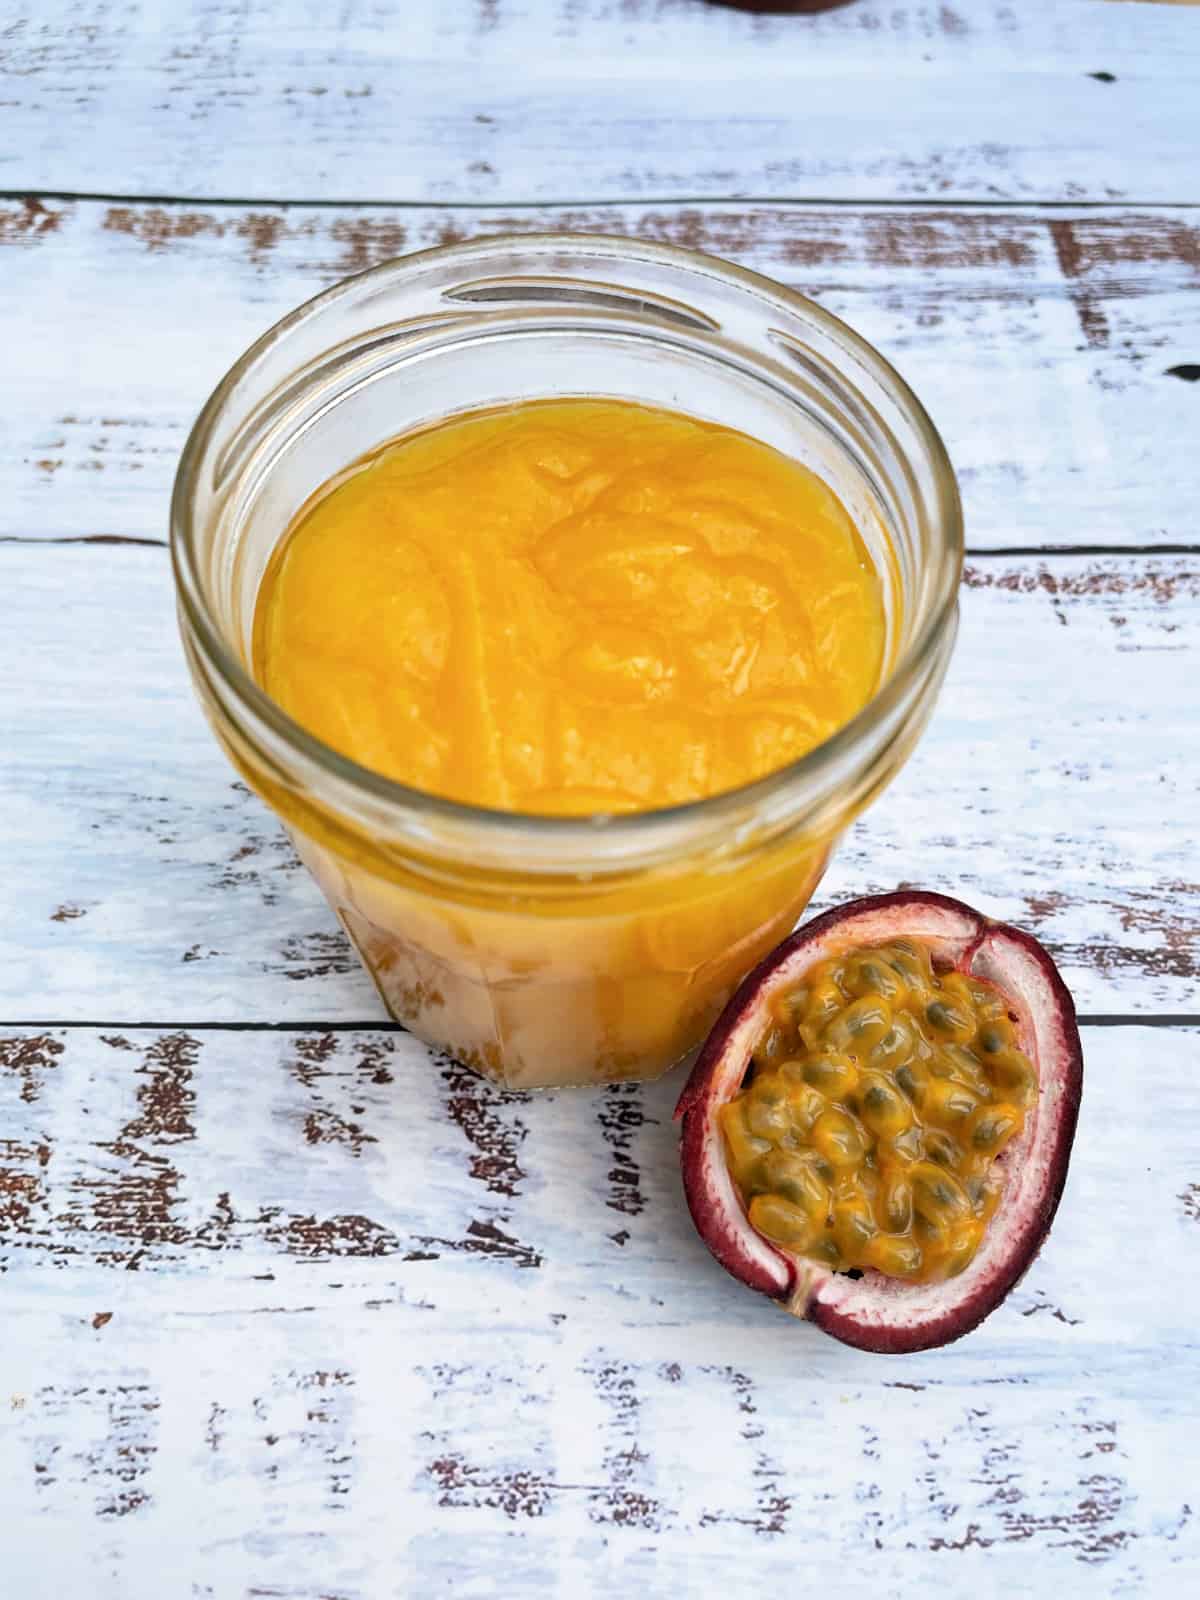 Jar of passionfruit curd with half a passionfruit on the side.